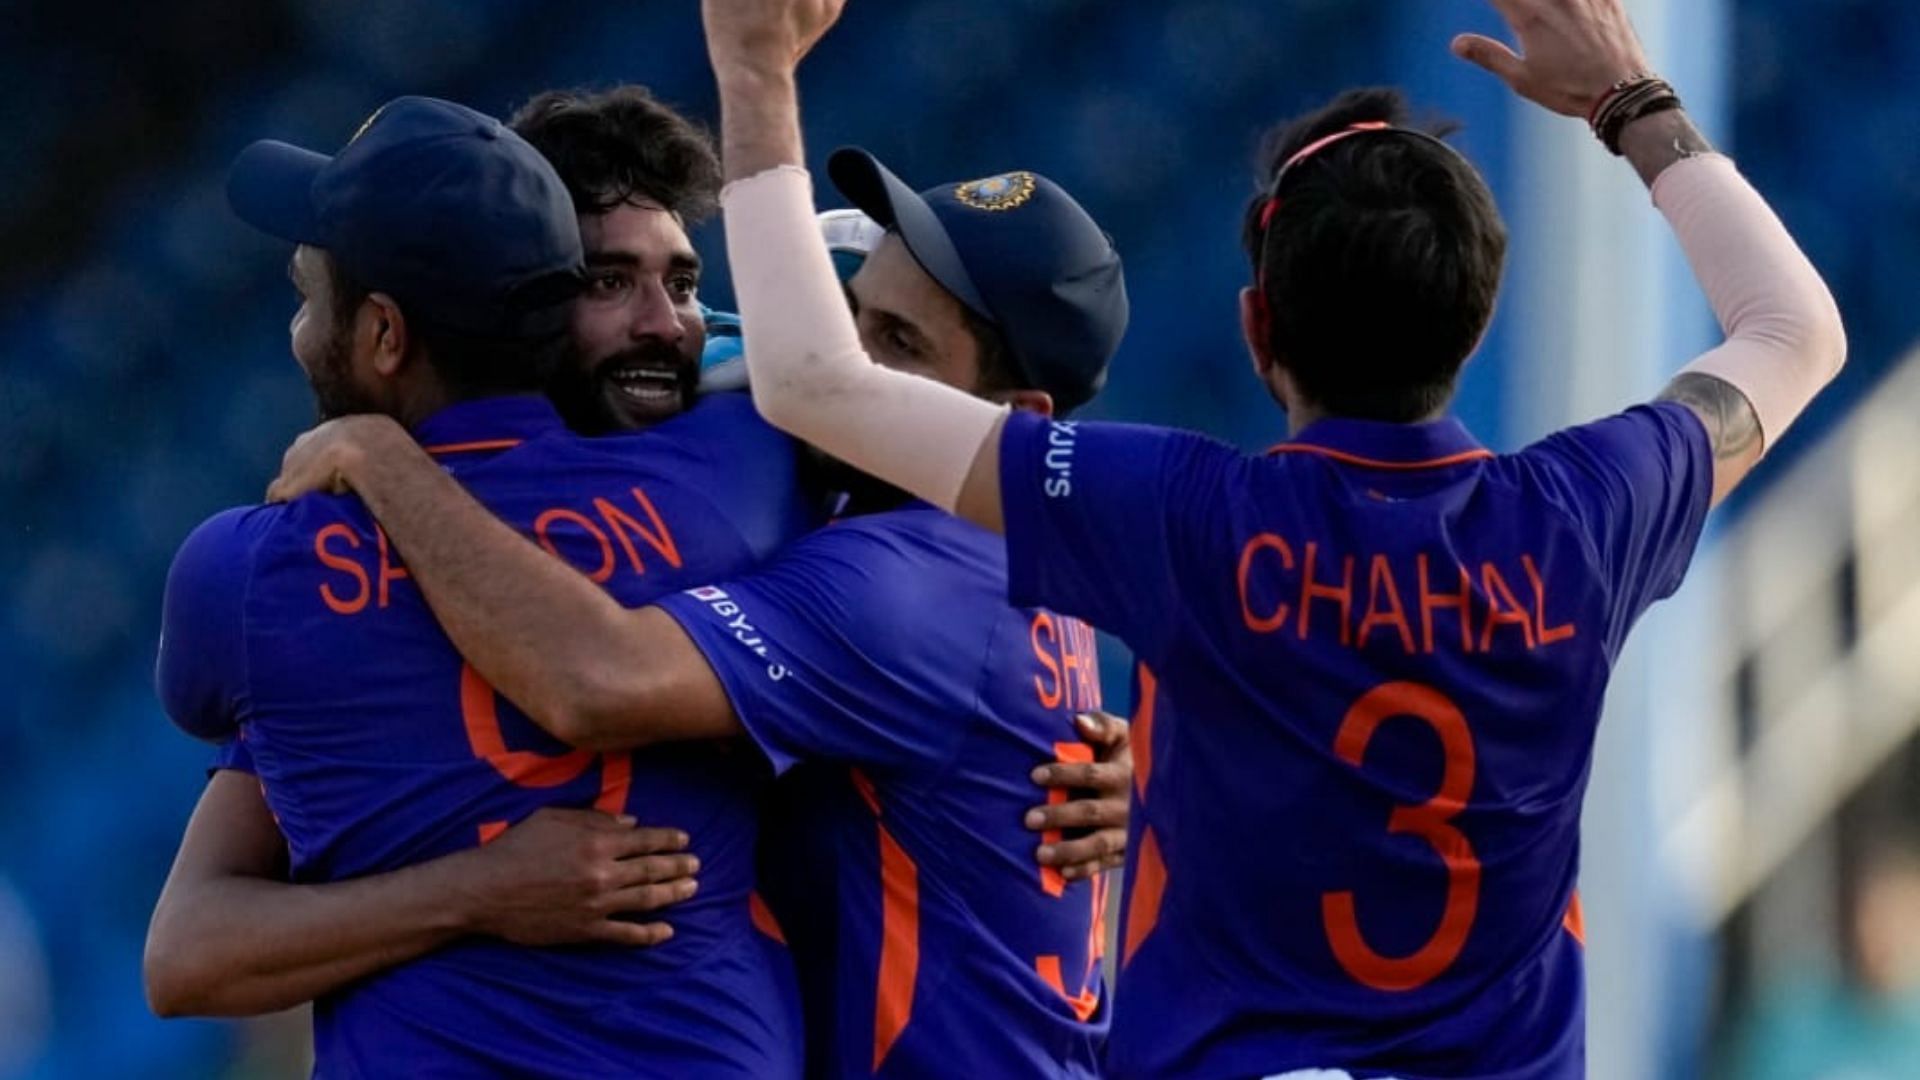 Yuzvendra Chahal and other teammates swarm around Siraj after India win by three runs. (P.C.:Fancode)